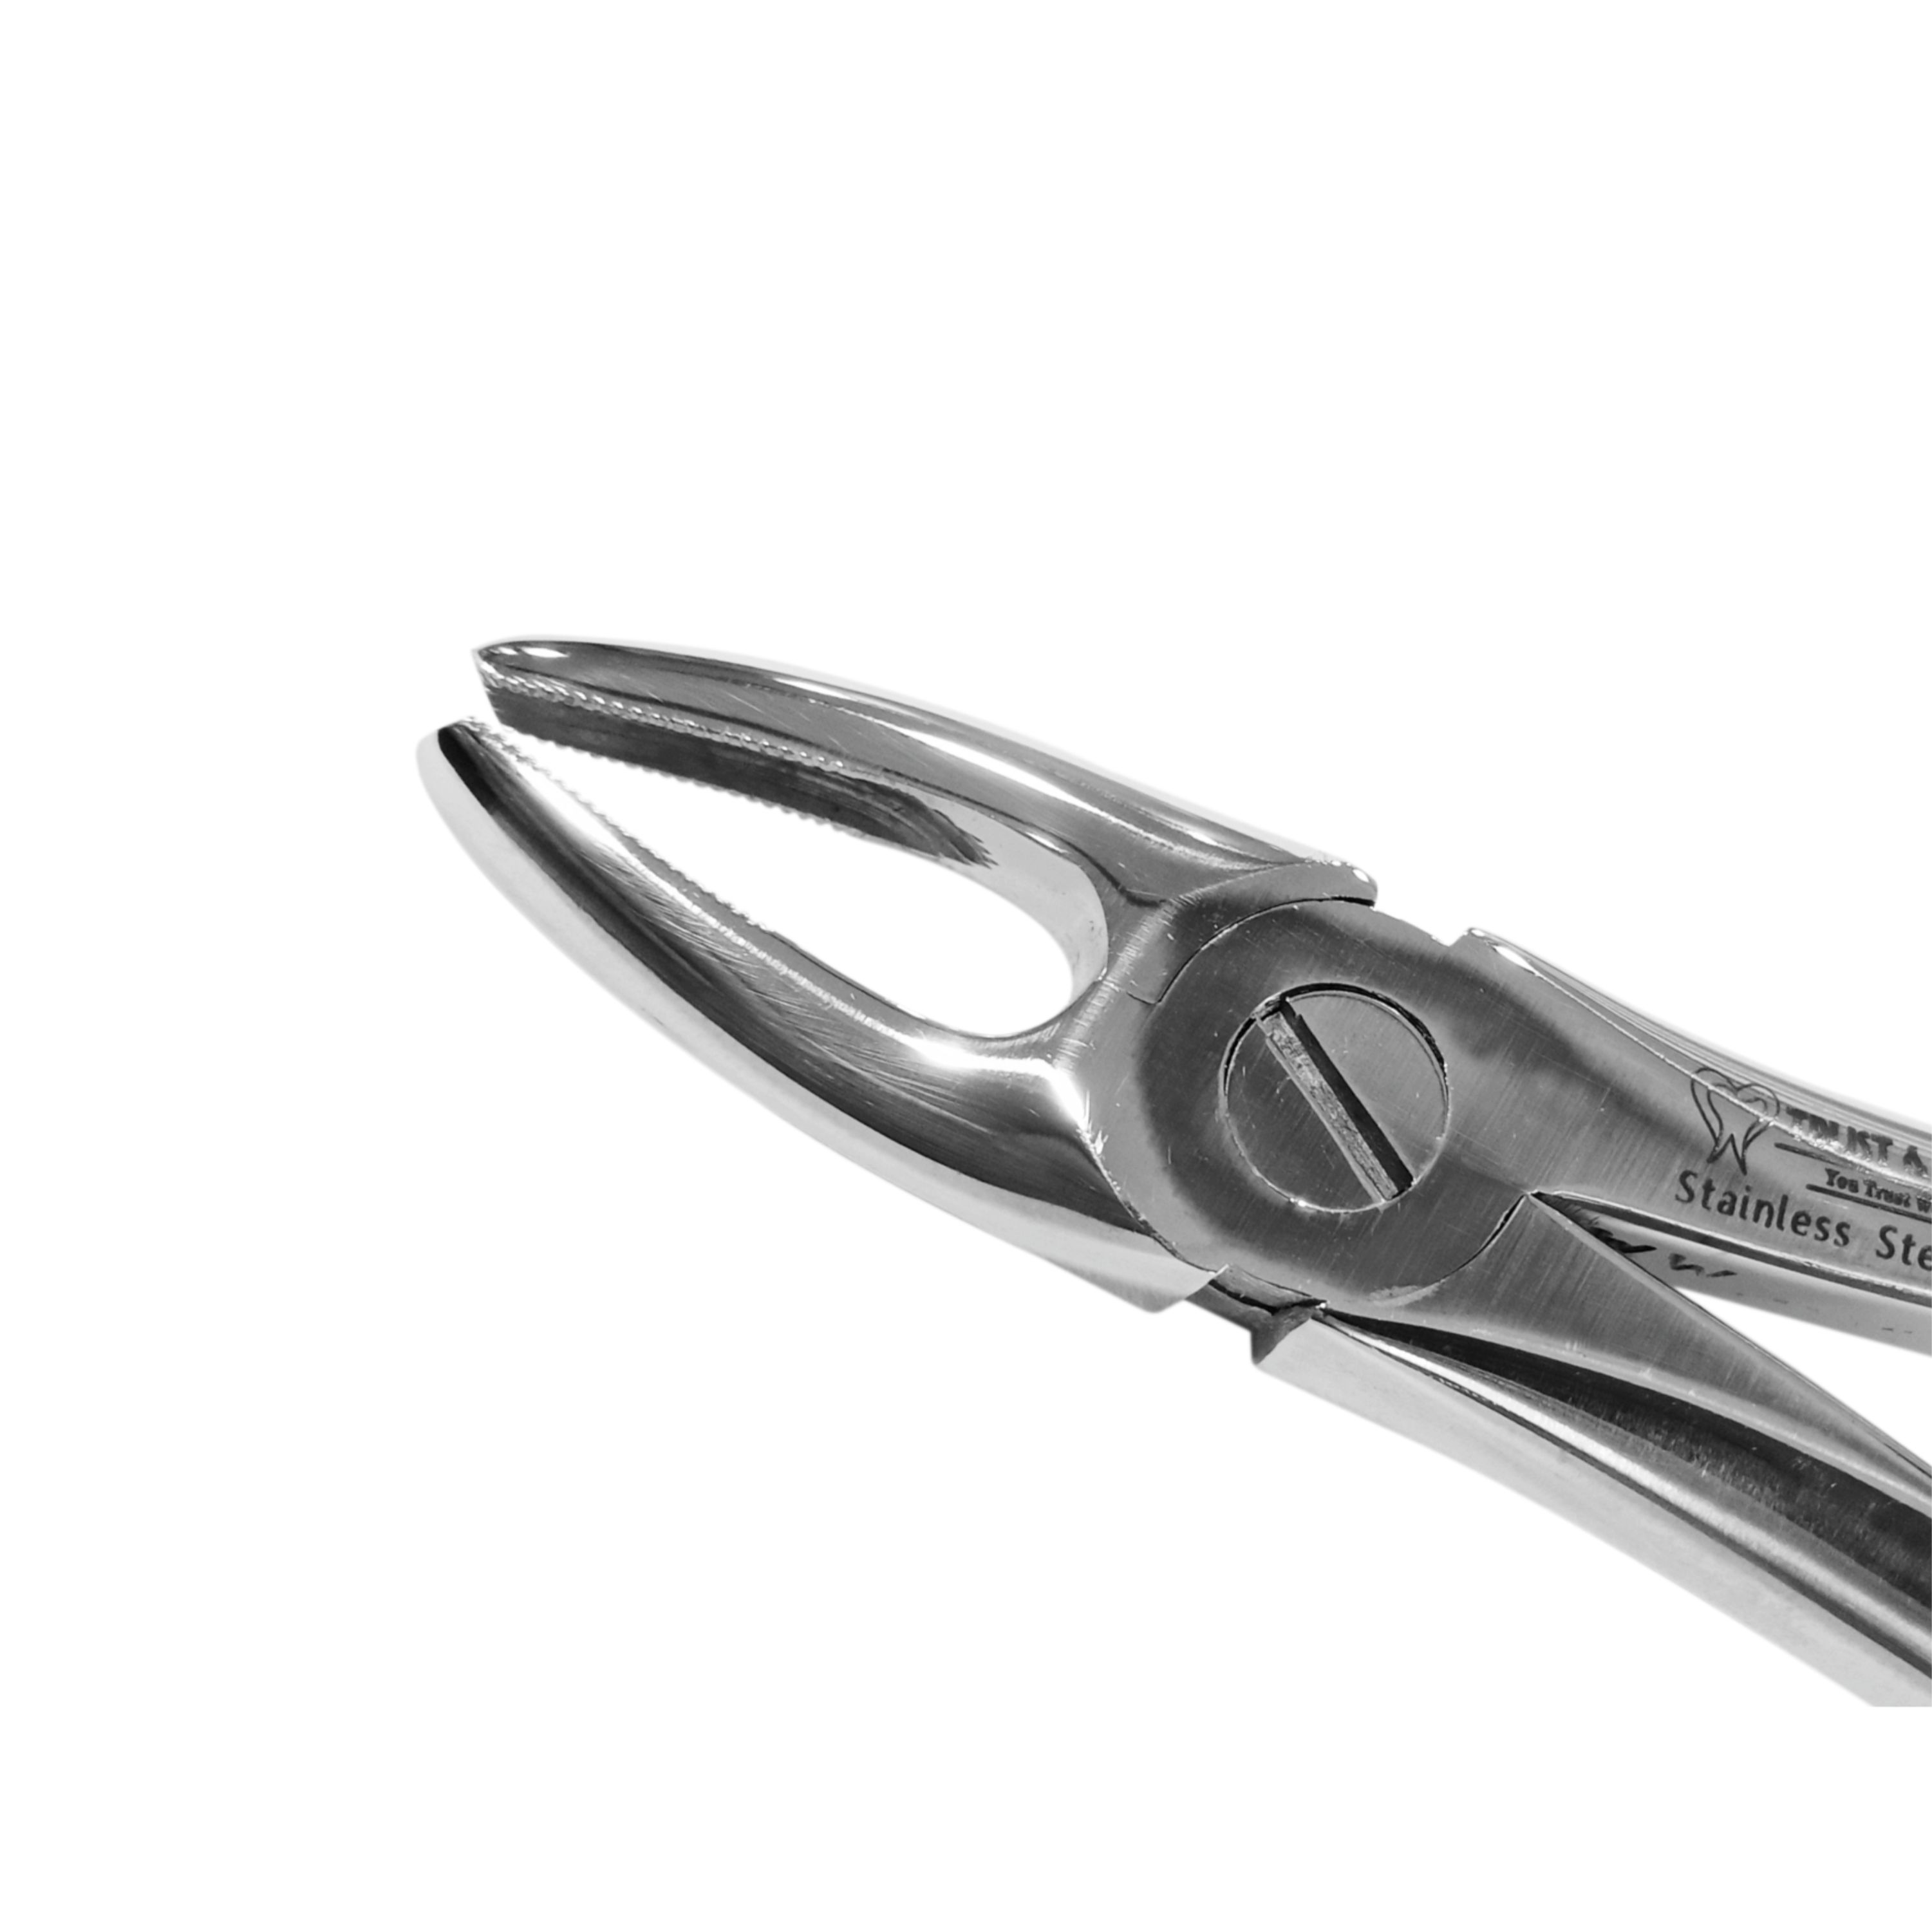 Trust & Care Tooth Extraction Forcep Upper Anteriors Fig No. 1 Standard